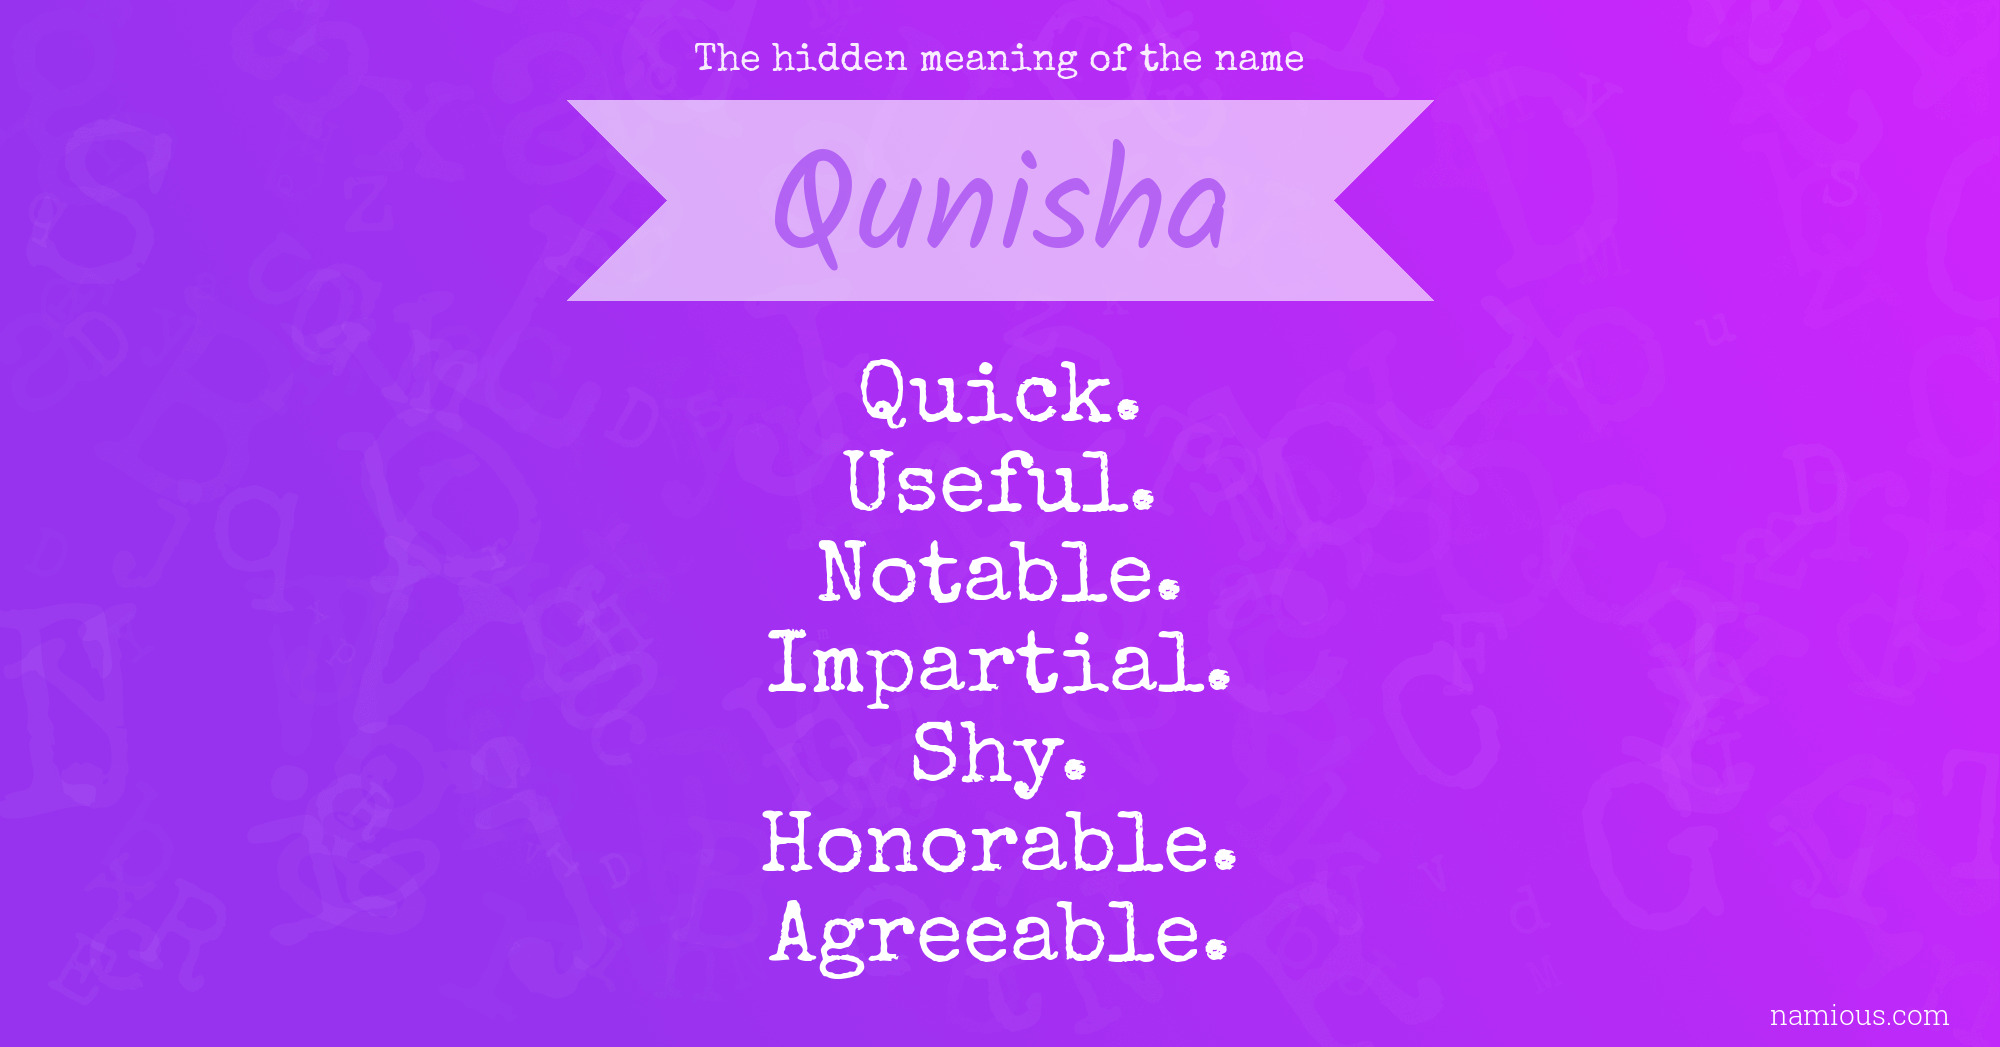 The hidden meaning of the name Qunisha